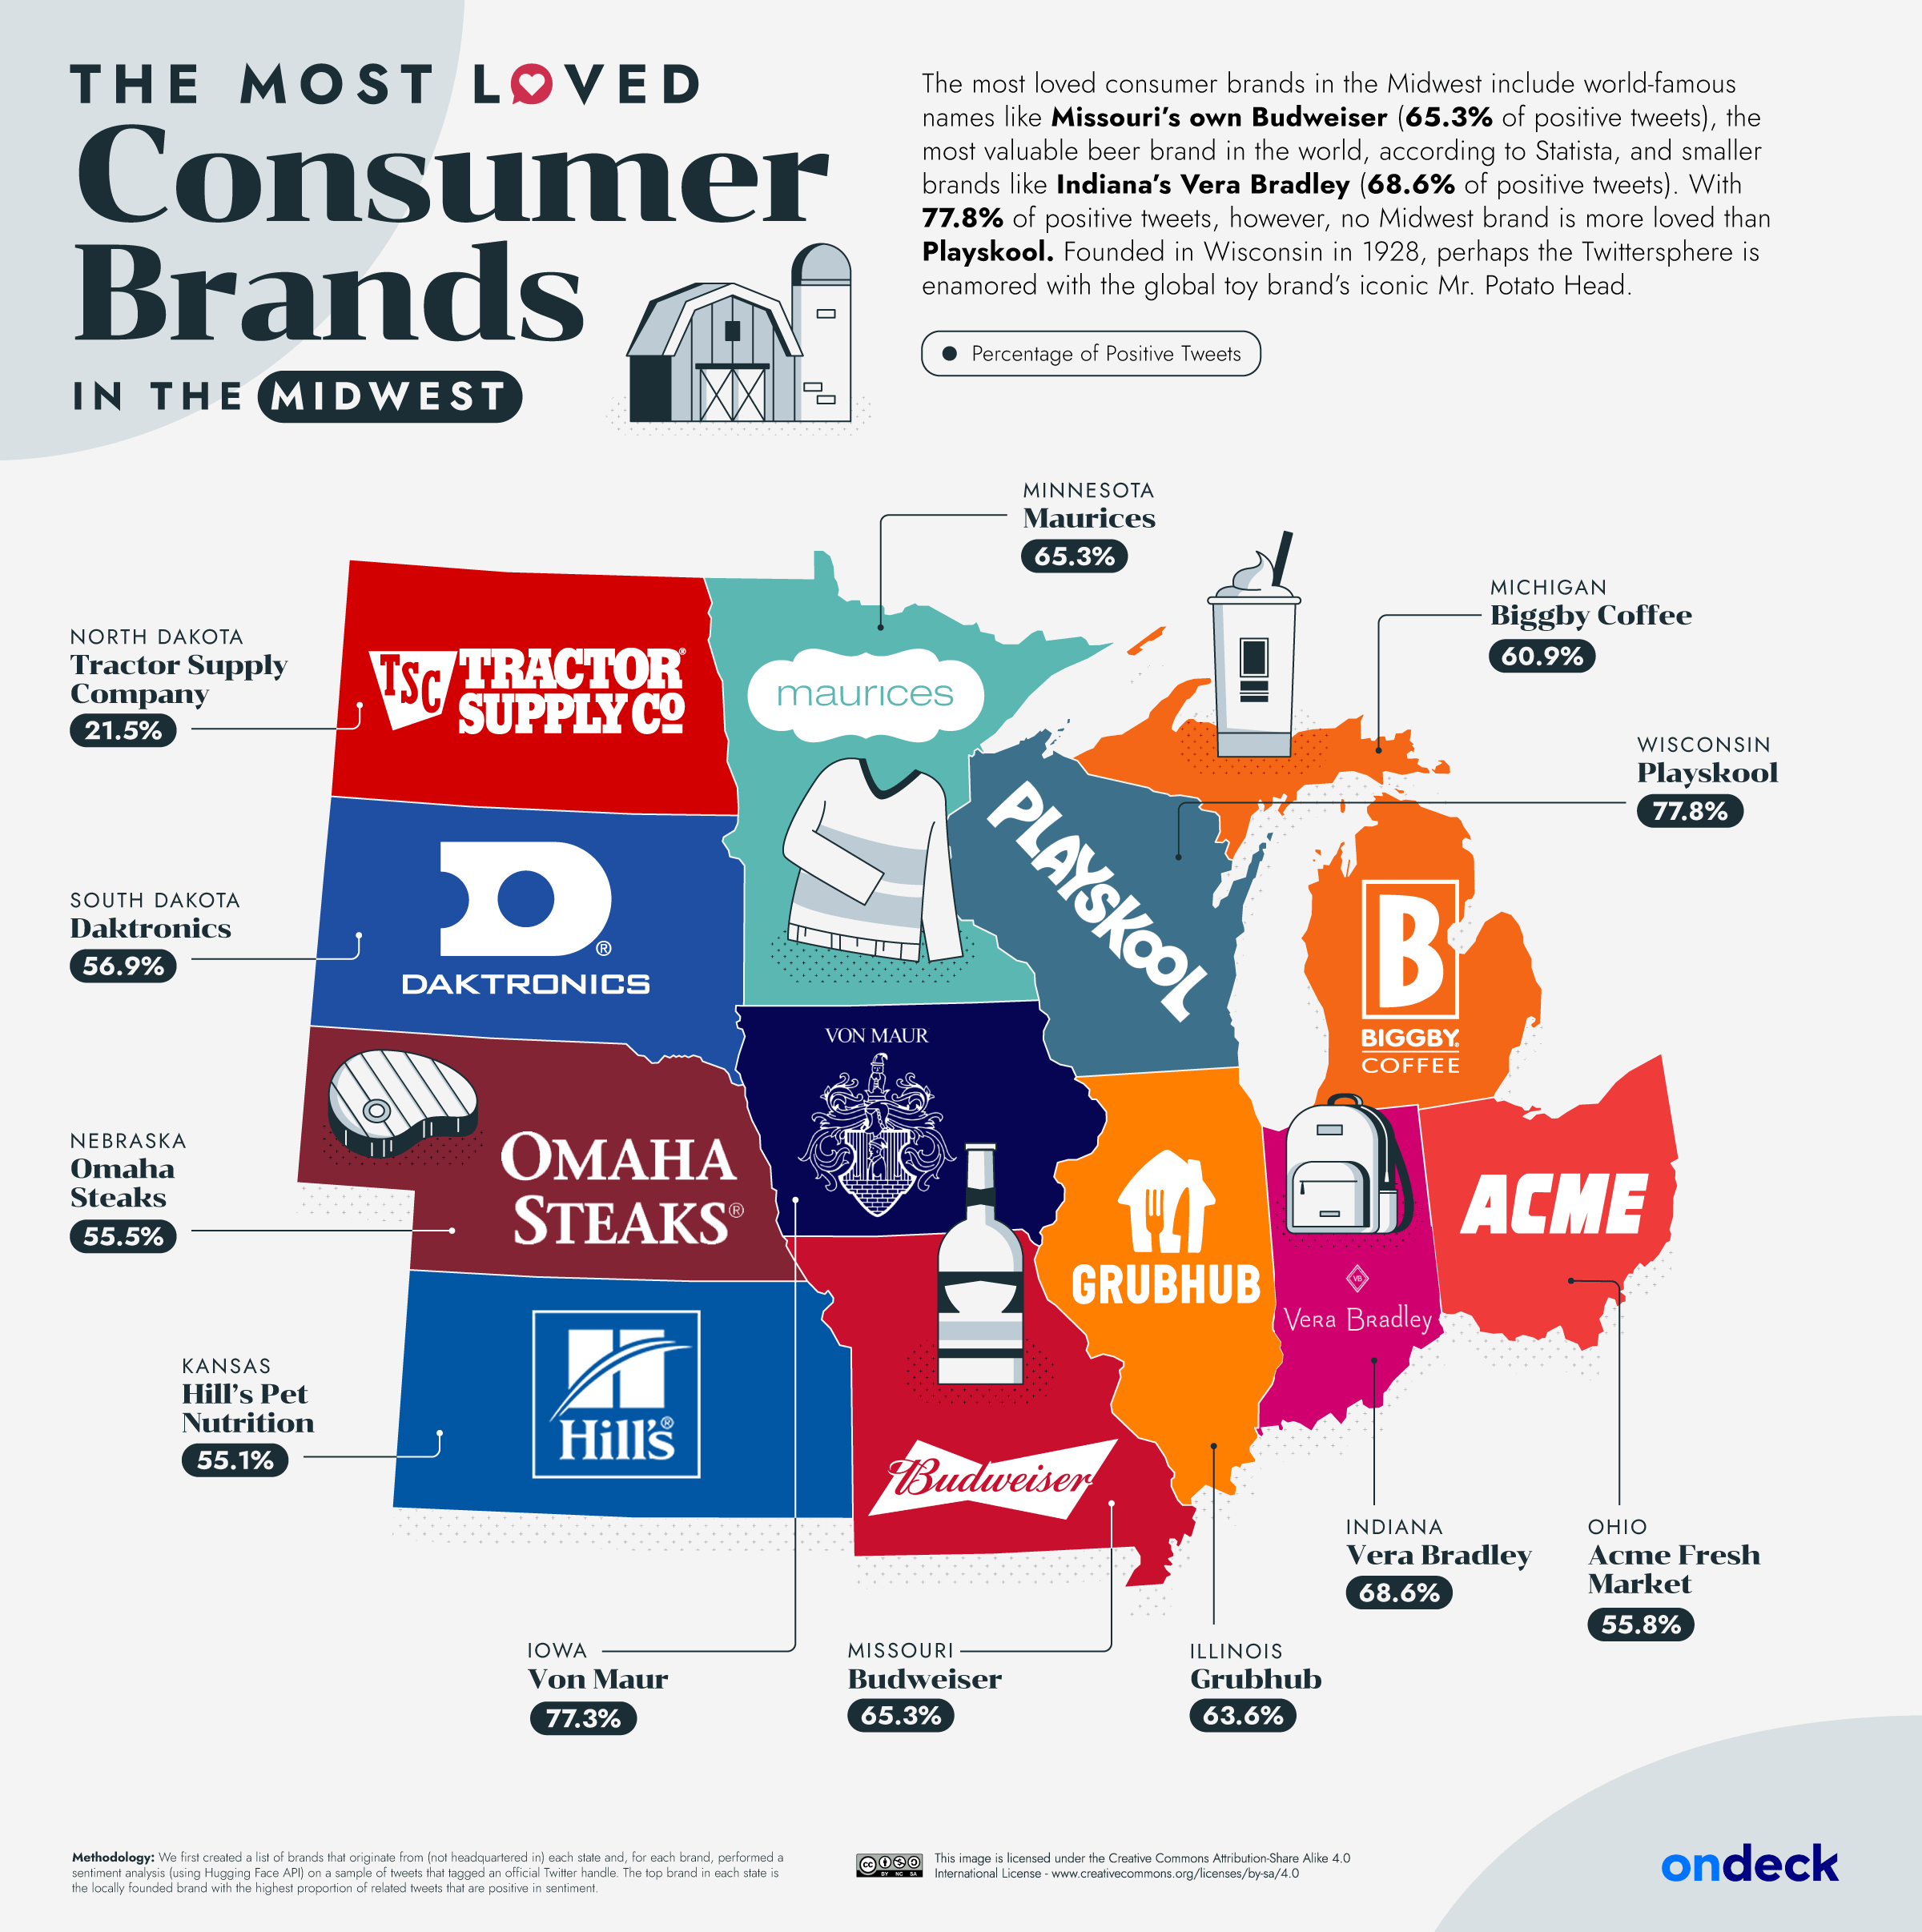 Map of the most loved consumer brands in the U.S. Midwest